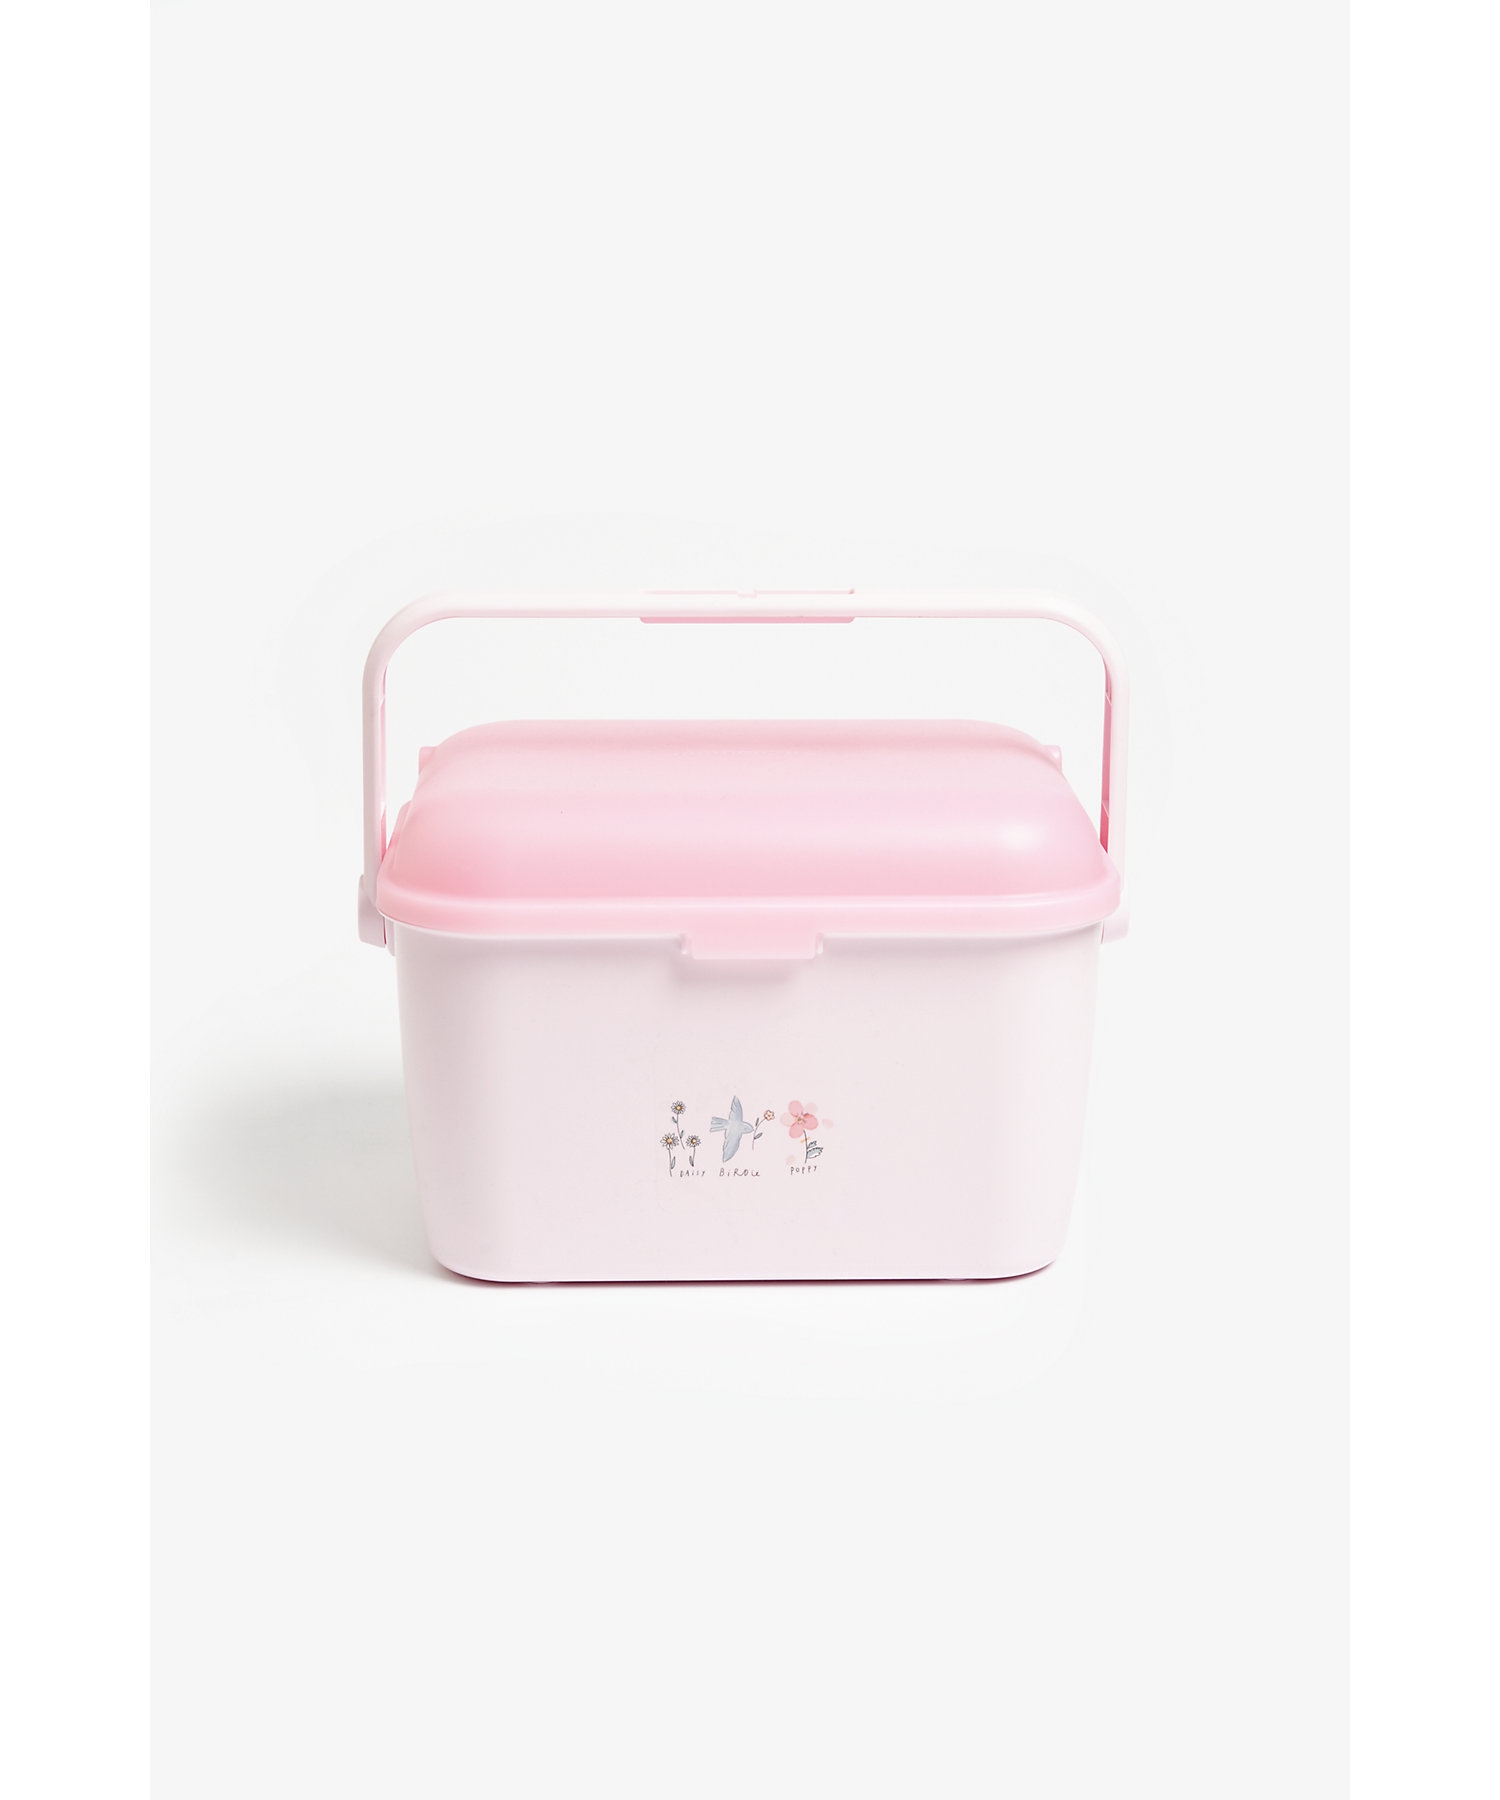 Mothercare | Mothercare Flutterby Bath Box Pink 0